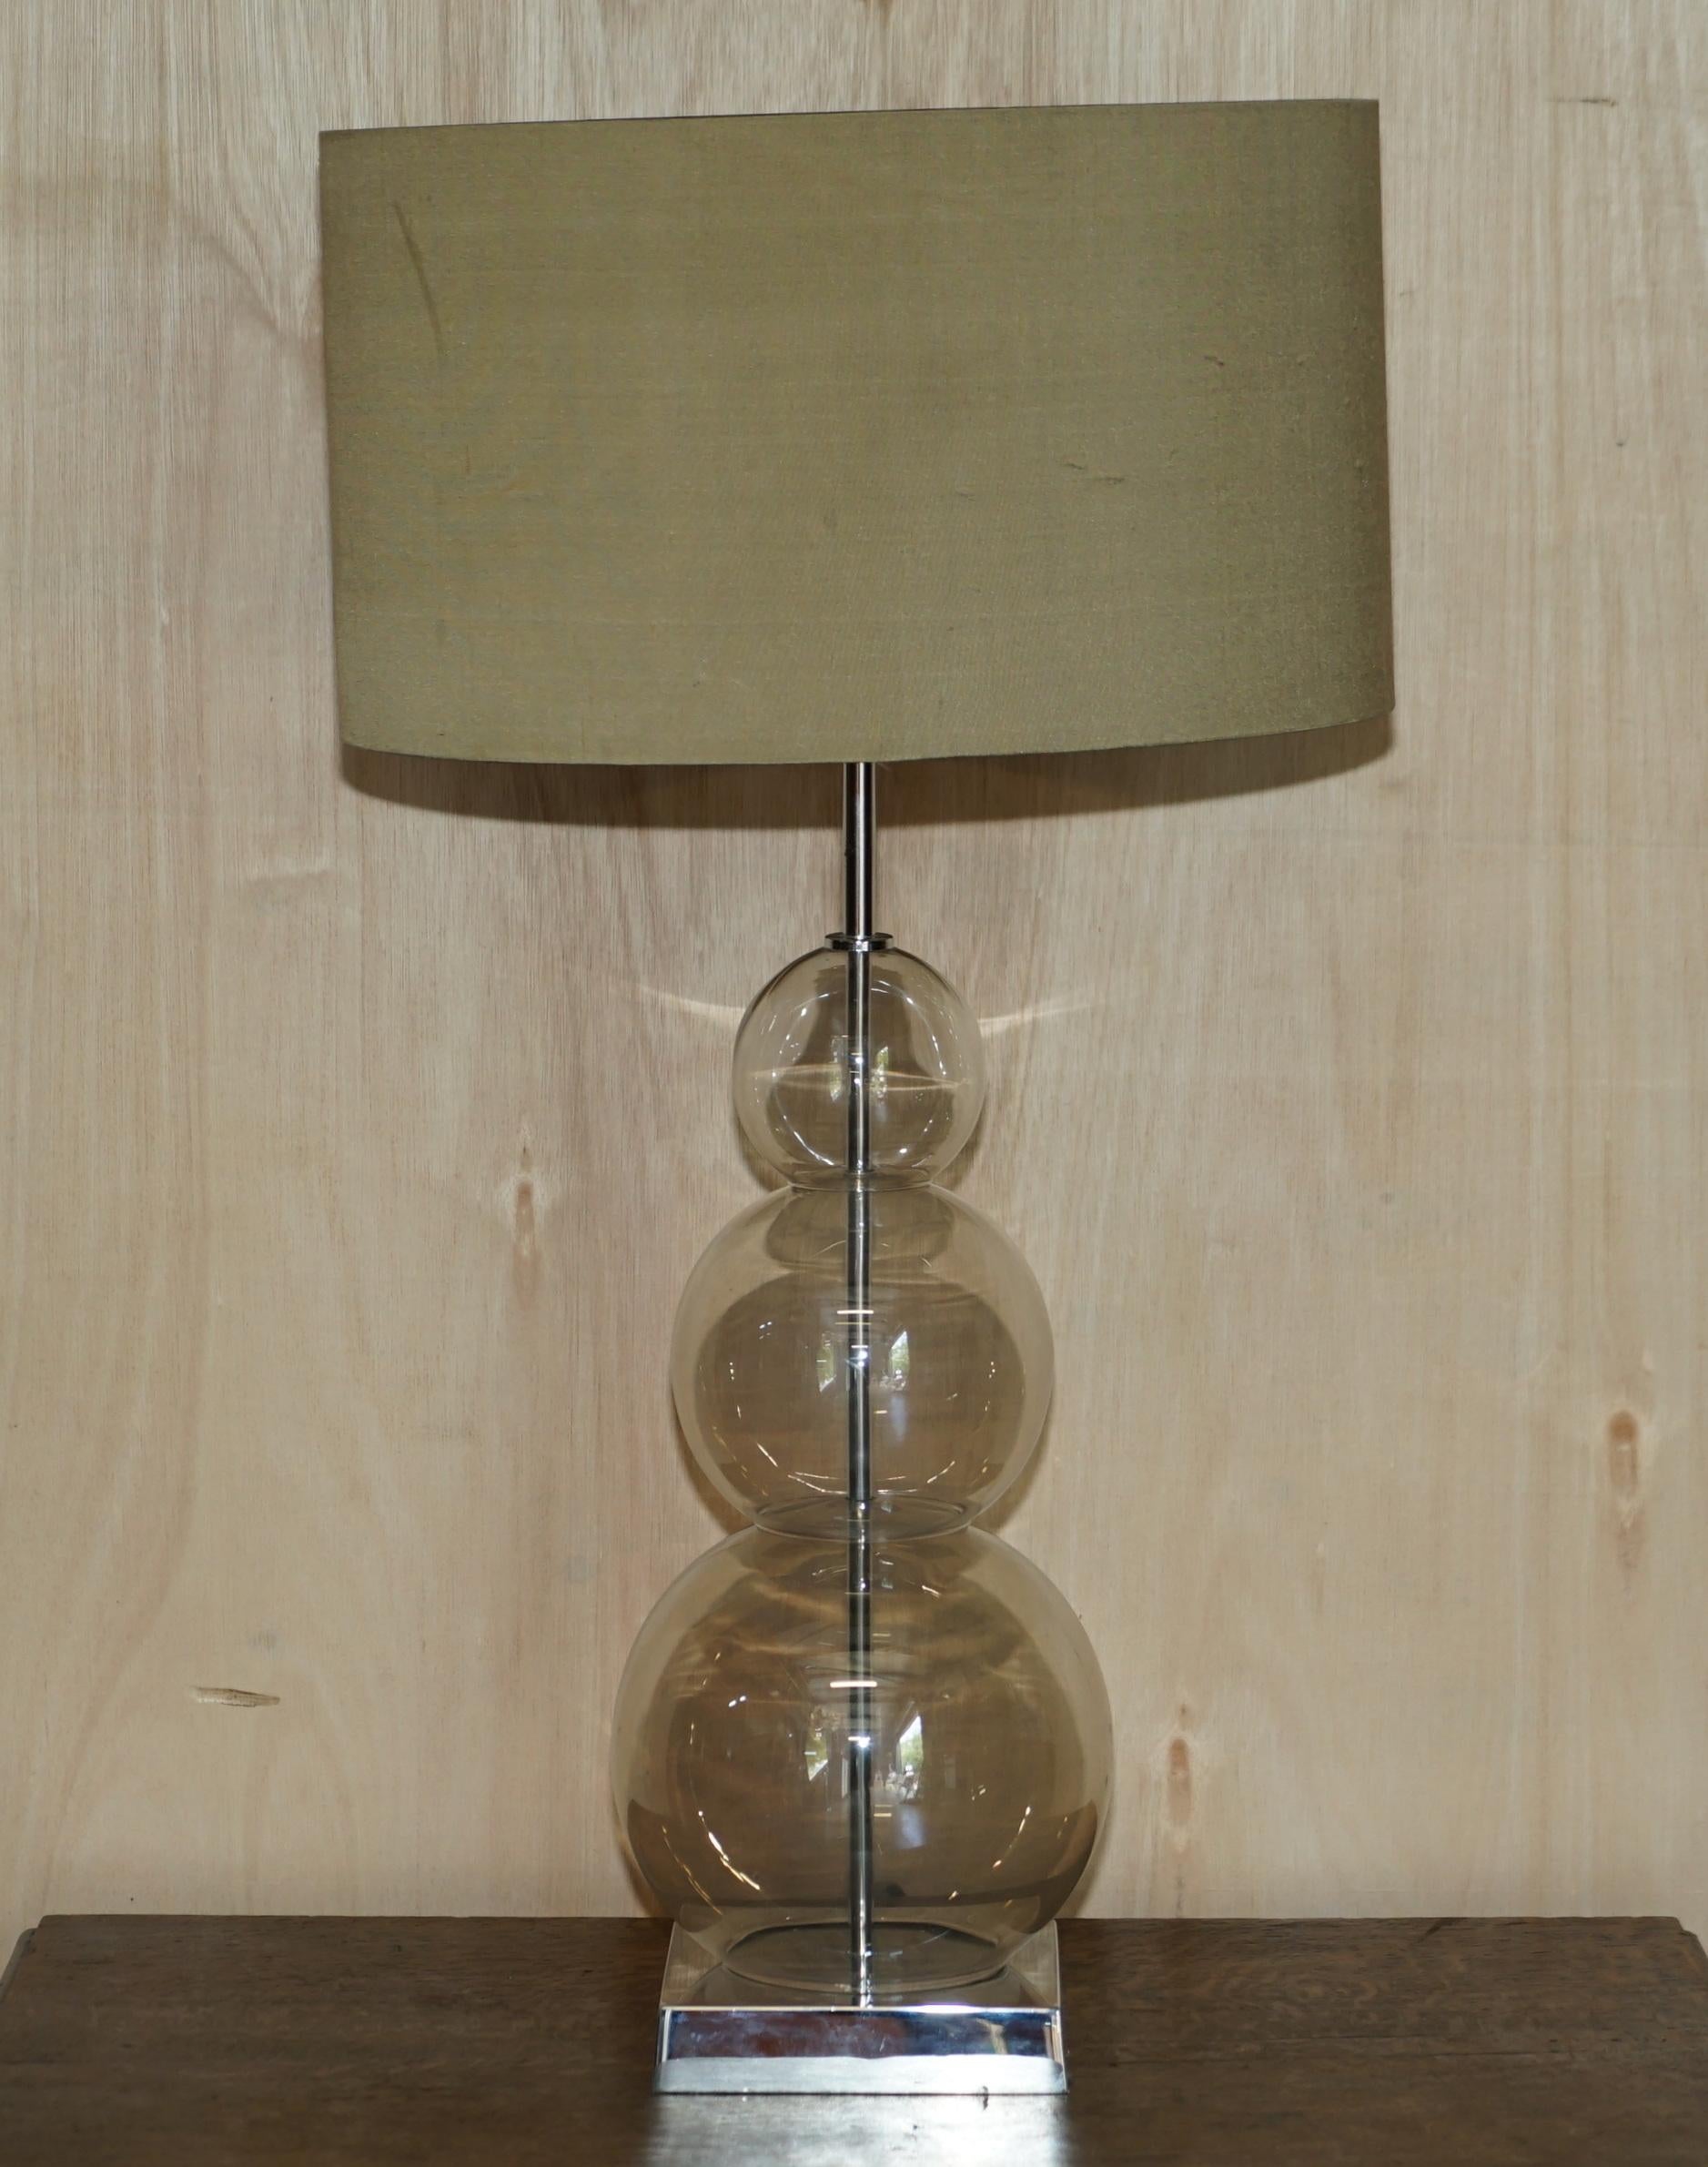 Pair of Heathfield & Co Opera 3 Ball Table Lamps with Original Shades 1